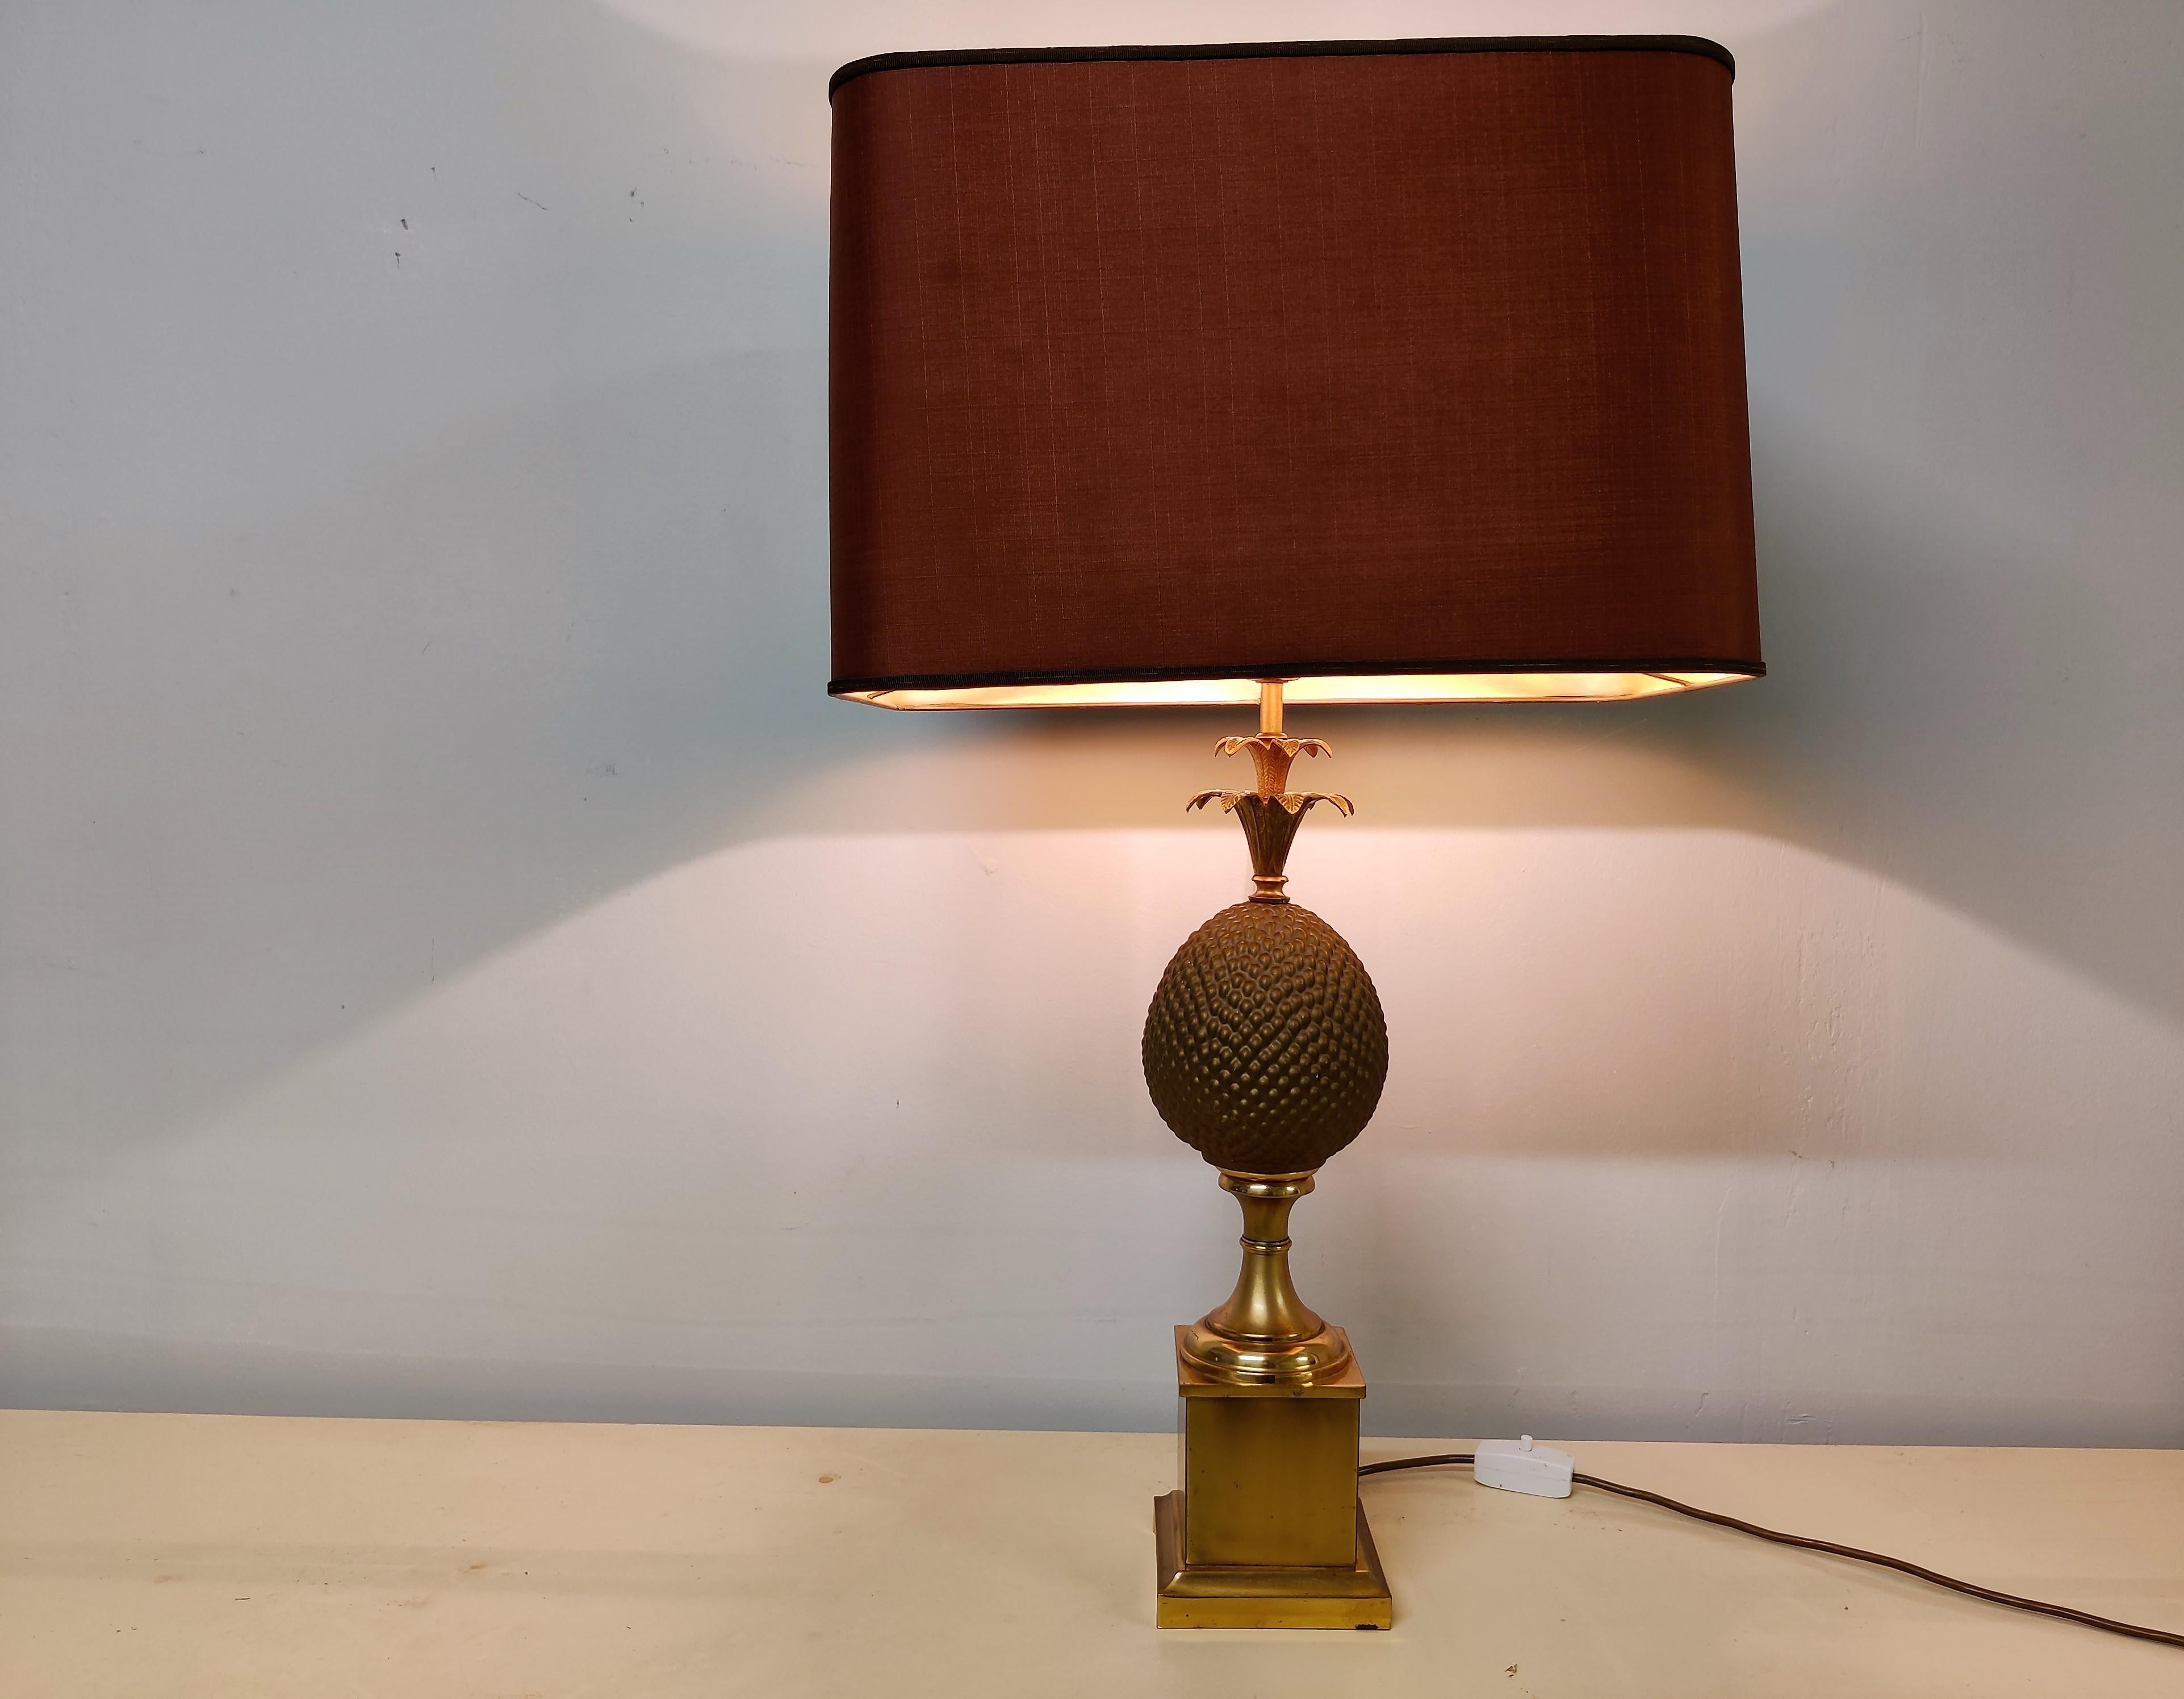 Elegant brass pineapple table lamp.

Beautiful details, right patina.

Supplied with its original bordeaux coloured shade.

1970s - France

Tested and ready for use. 

Good overall condition, slight wear on the base.